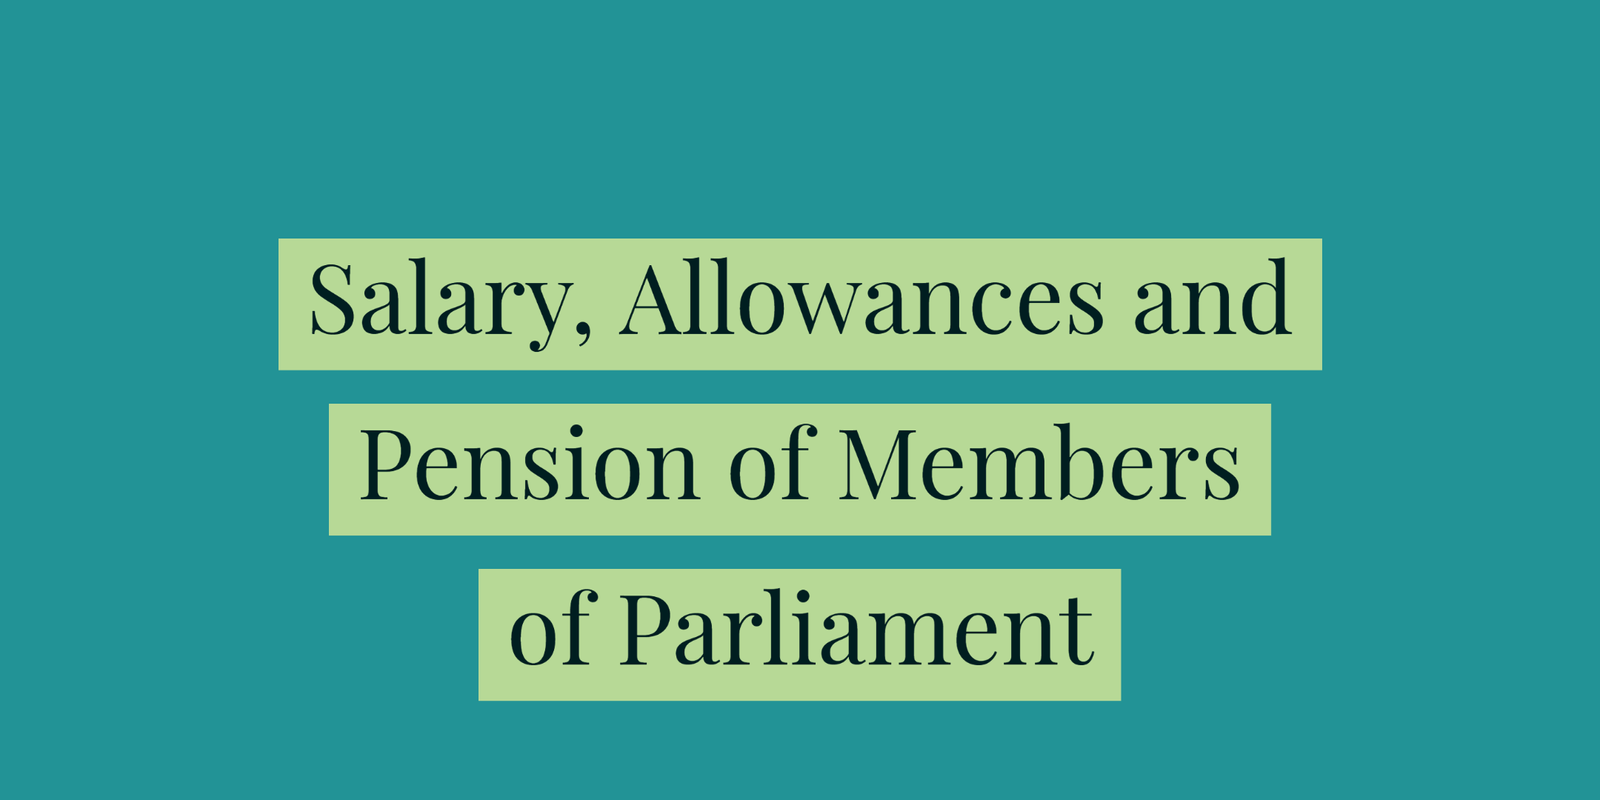 Salary, Allowances and Pension Reduced by 30/-